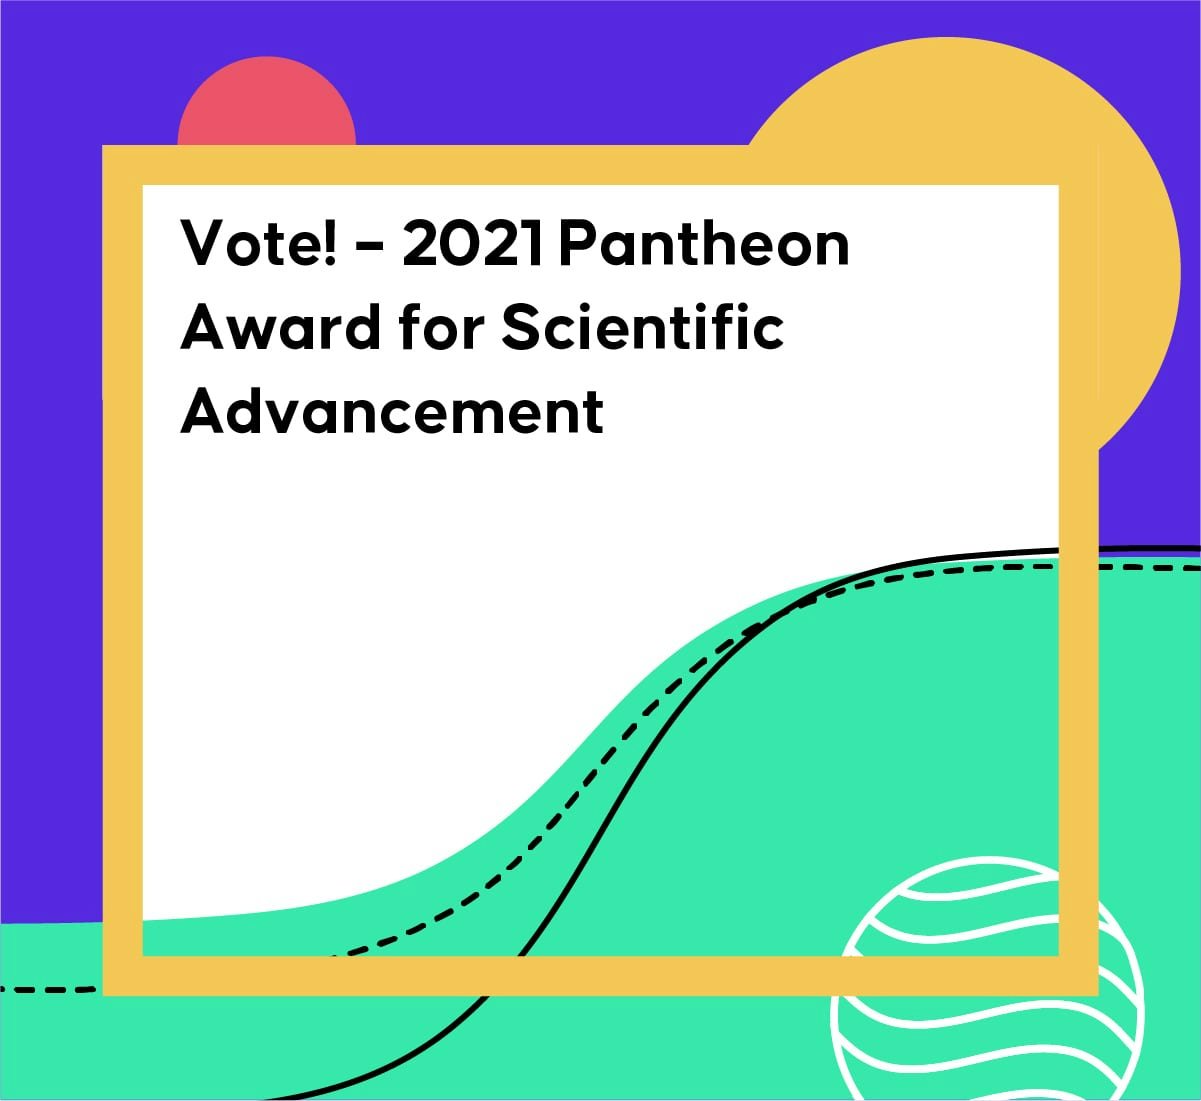 Cover image for Drug Hunter article "Vote! - 2021 Pantheon Award for Scientific Advancement"|Chemical structure of molecule Sotorasib (AMG-510)